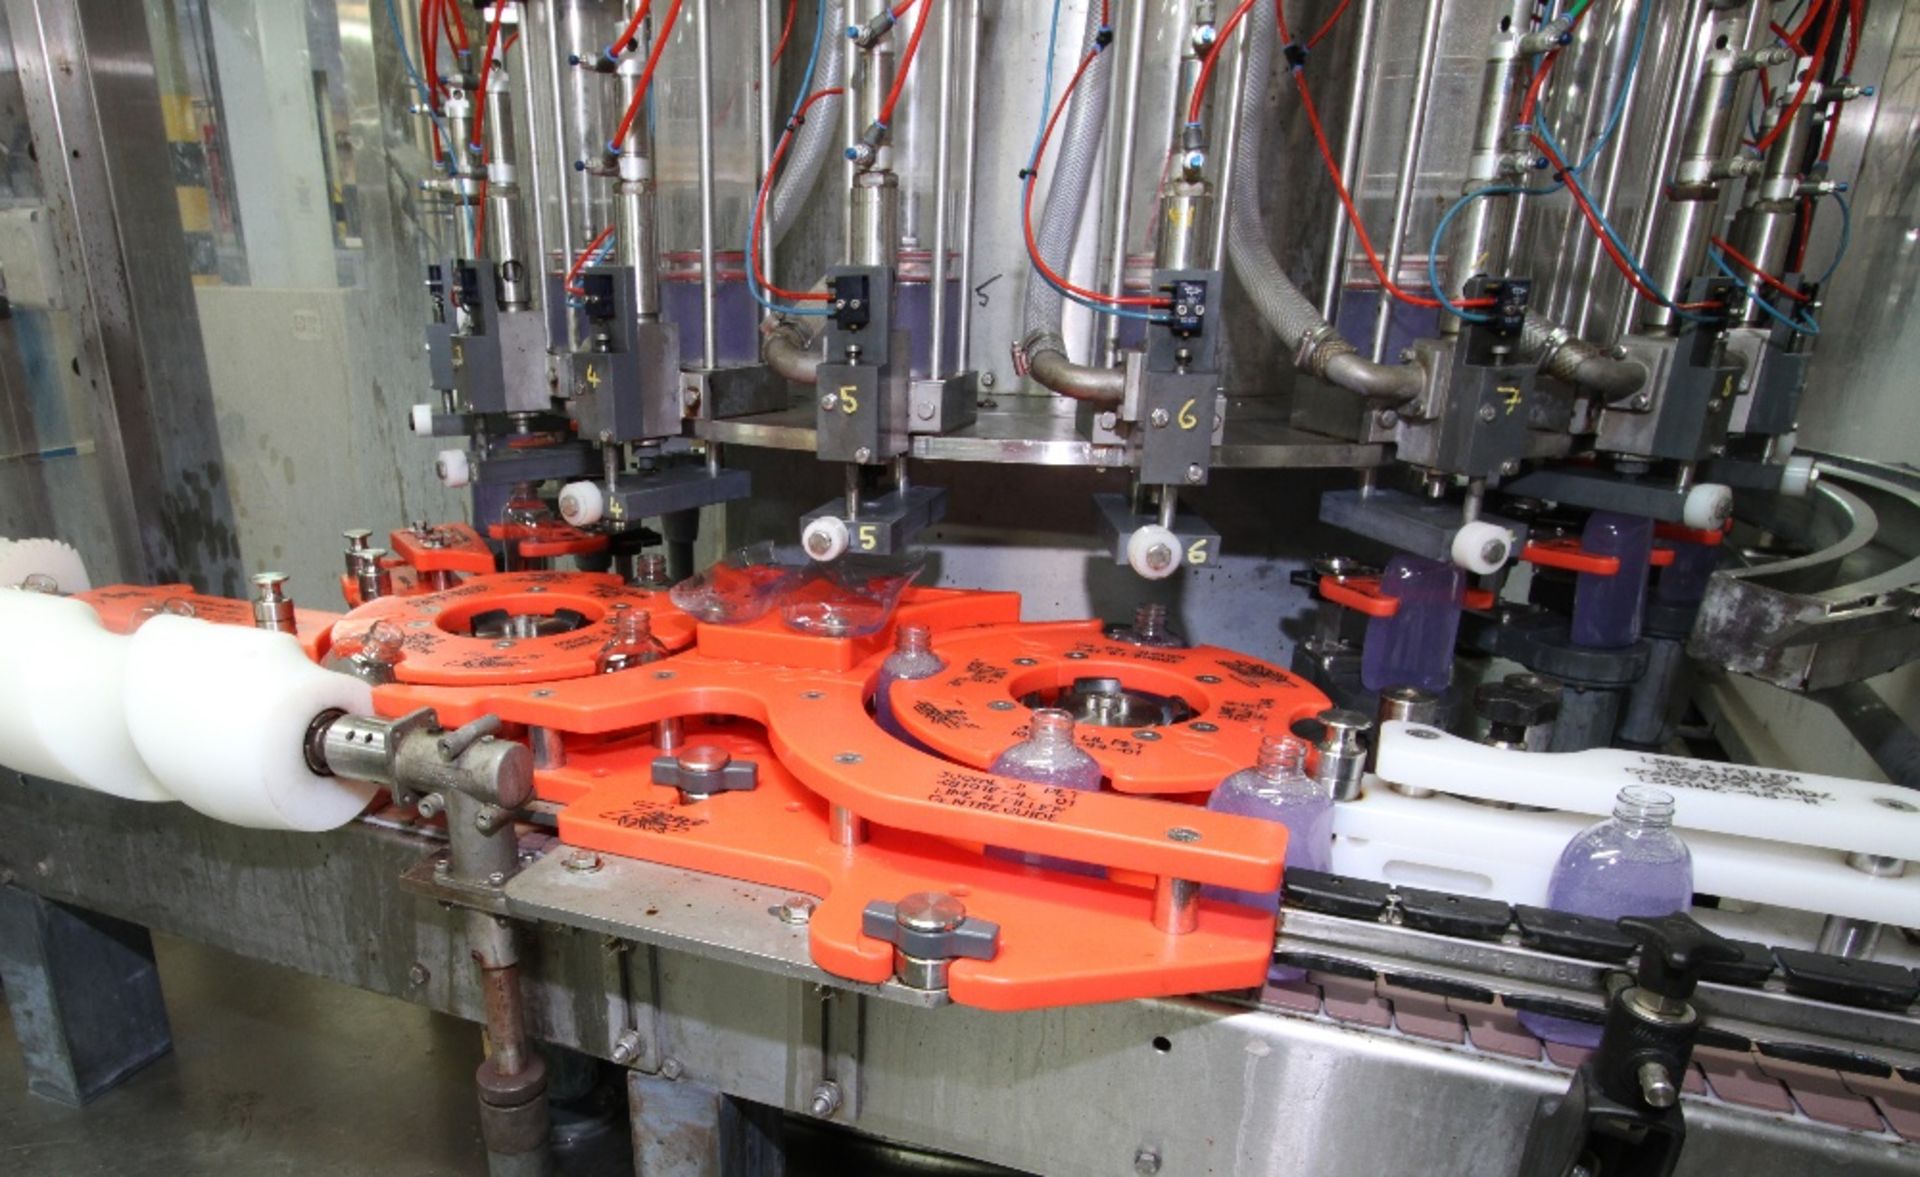 Contents Of World Class Manufacturer's Bottling Line. - Image 36 of 87